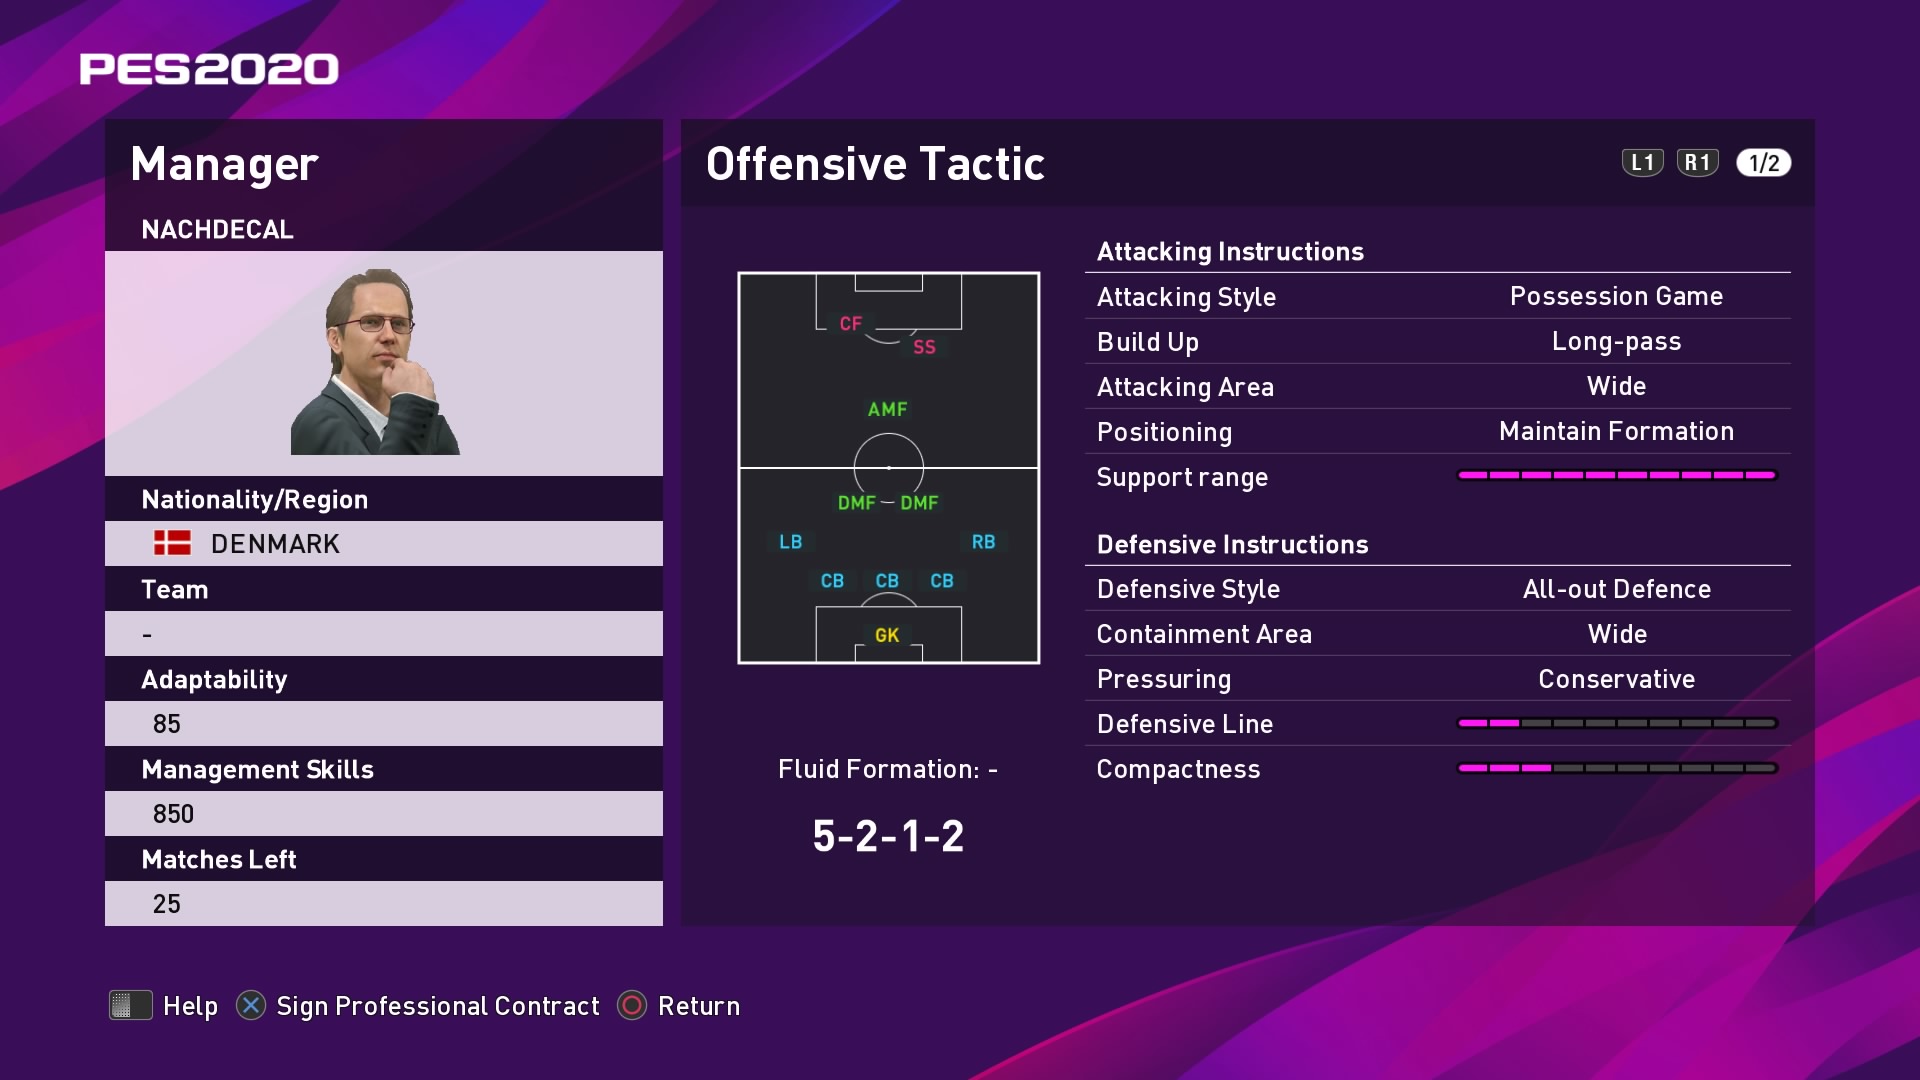 Nachdecal Offensive Tactic in PES 2020 myClub